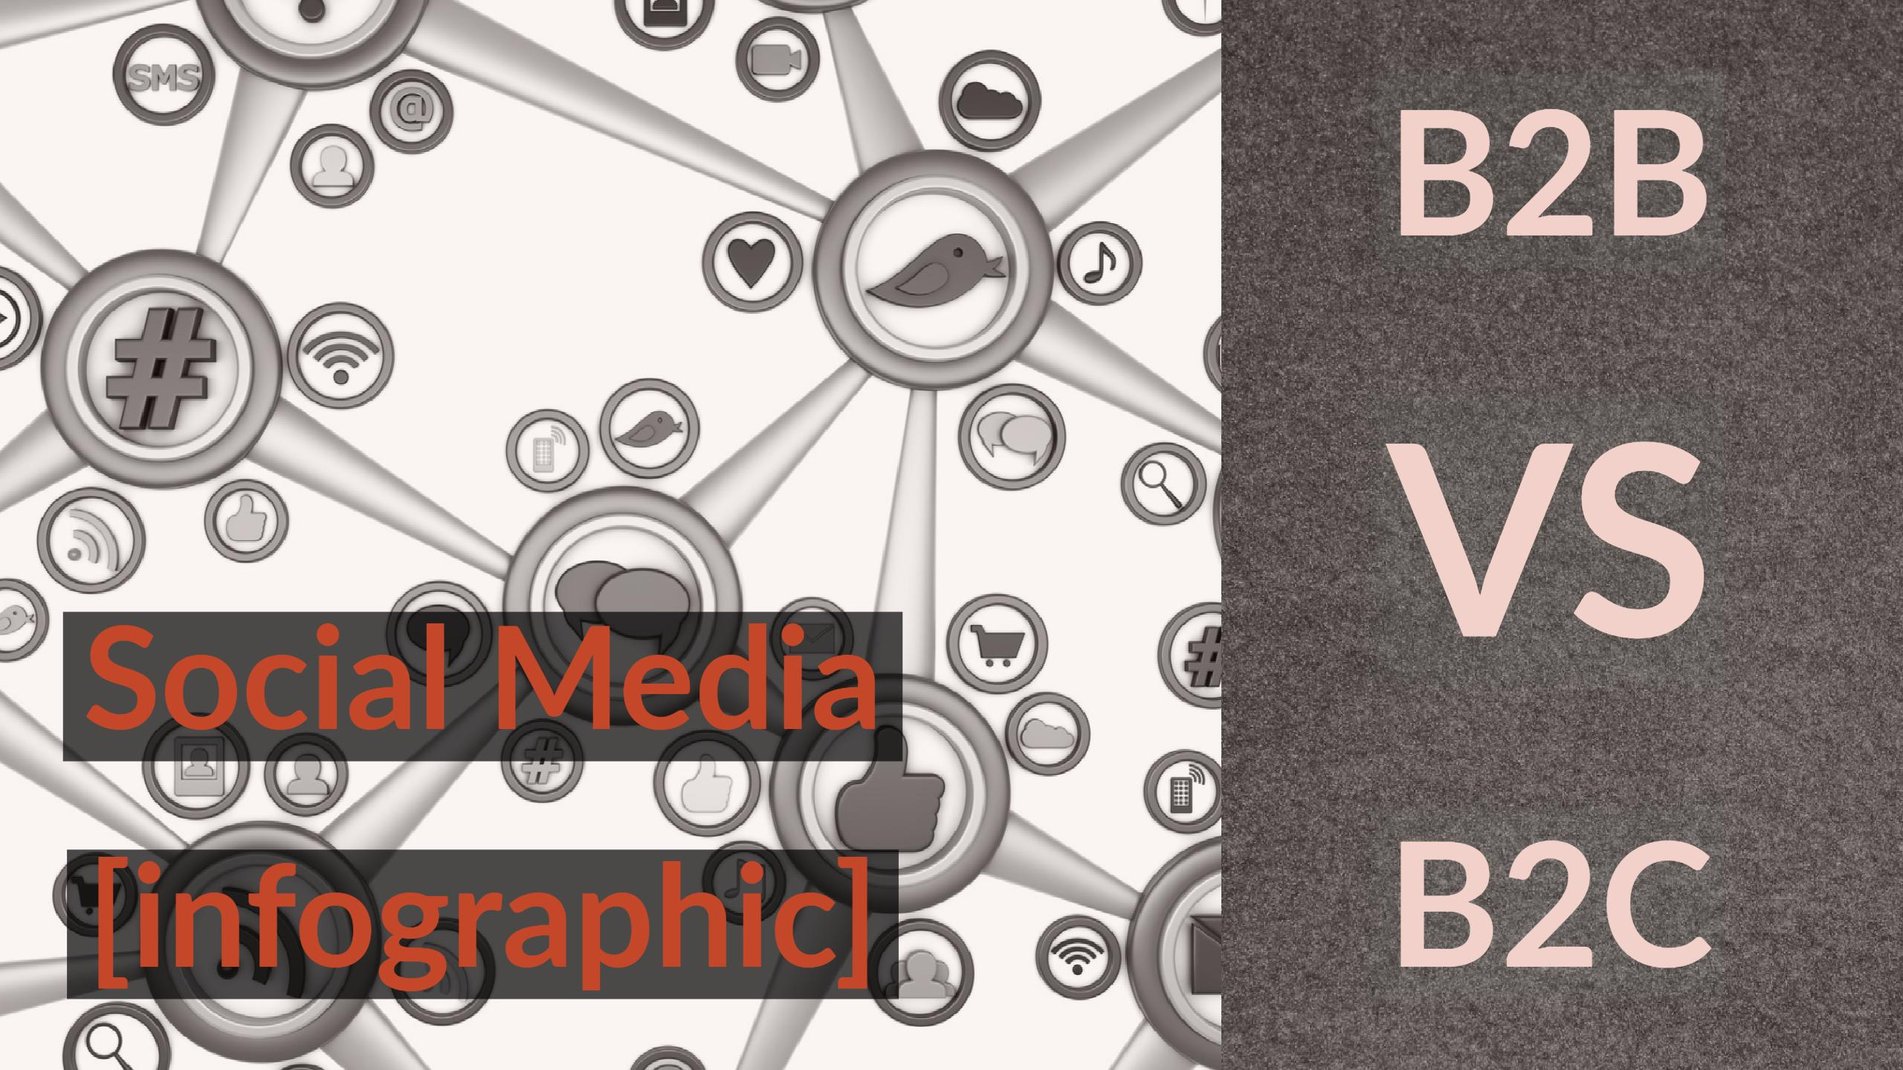 The Difference Between B2B & B2C on Social Media